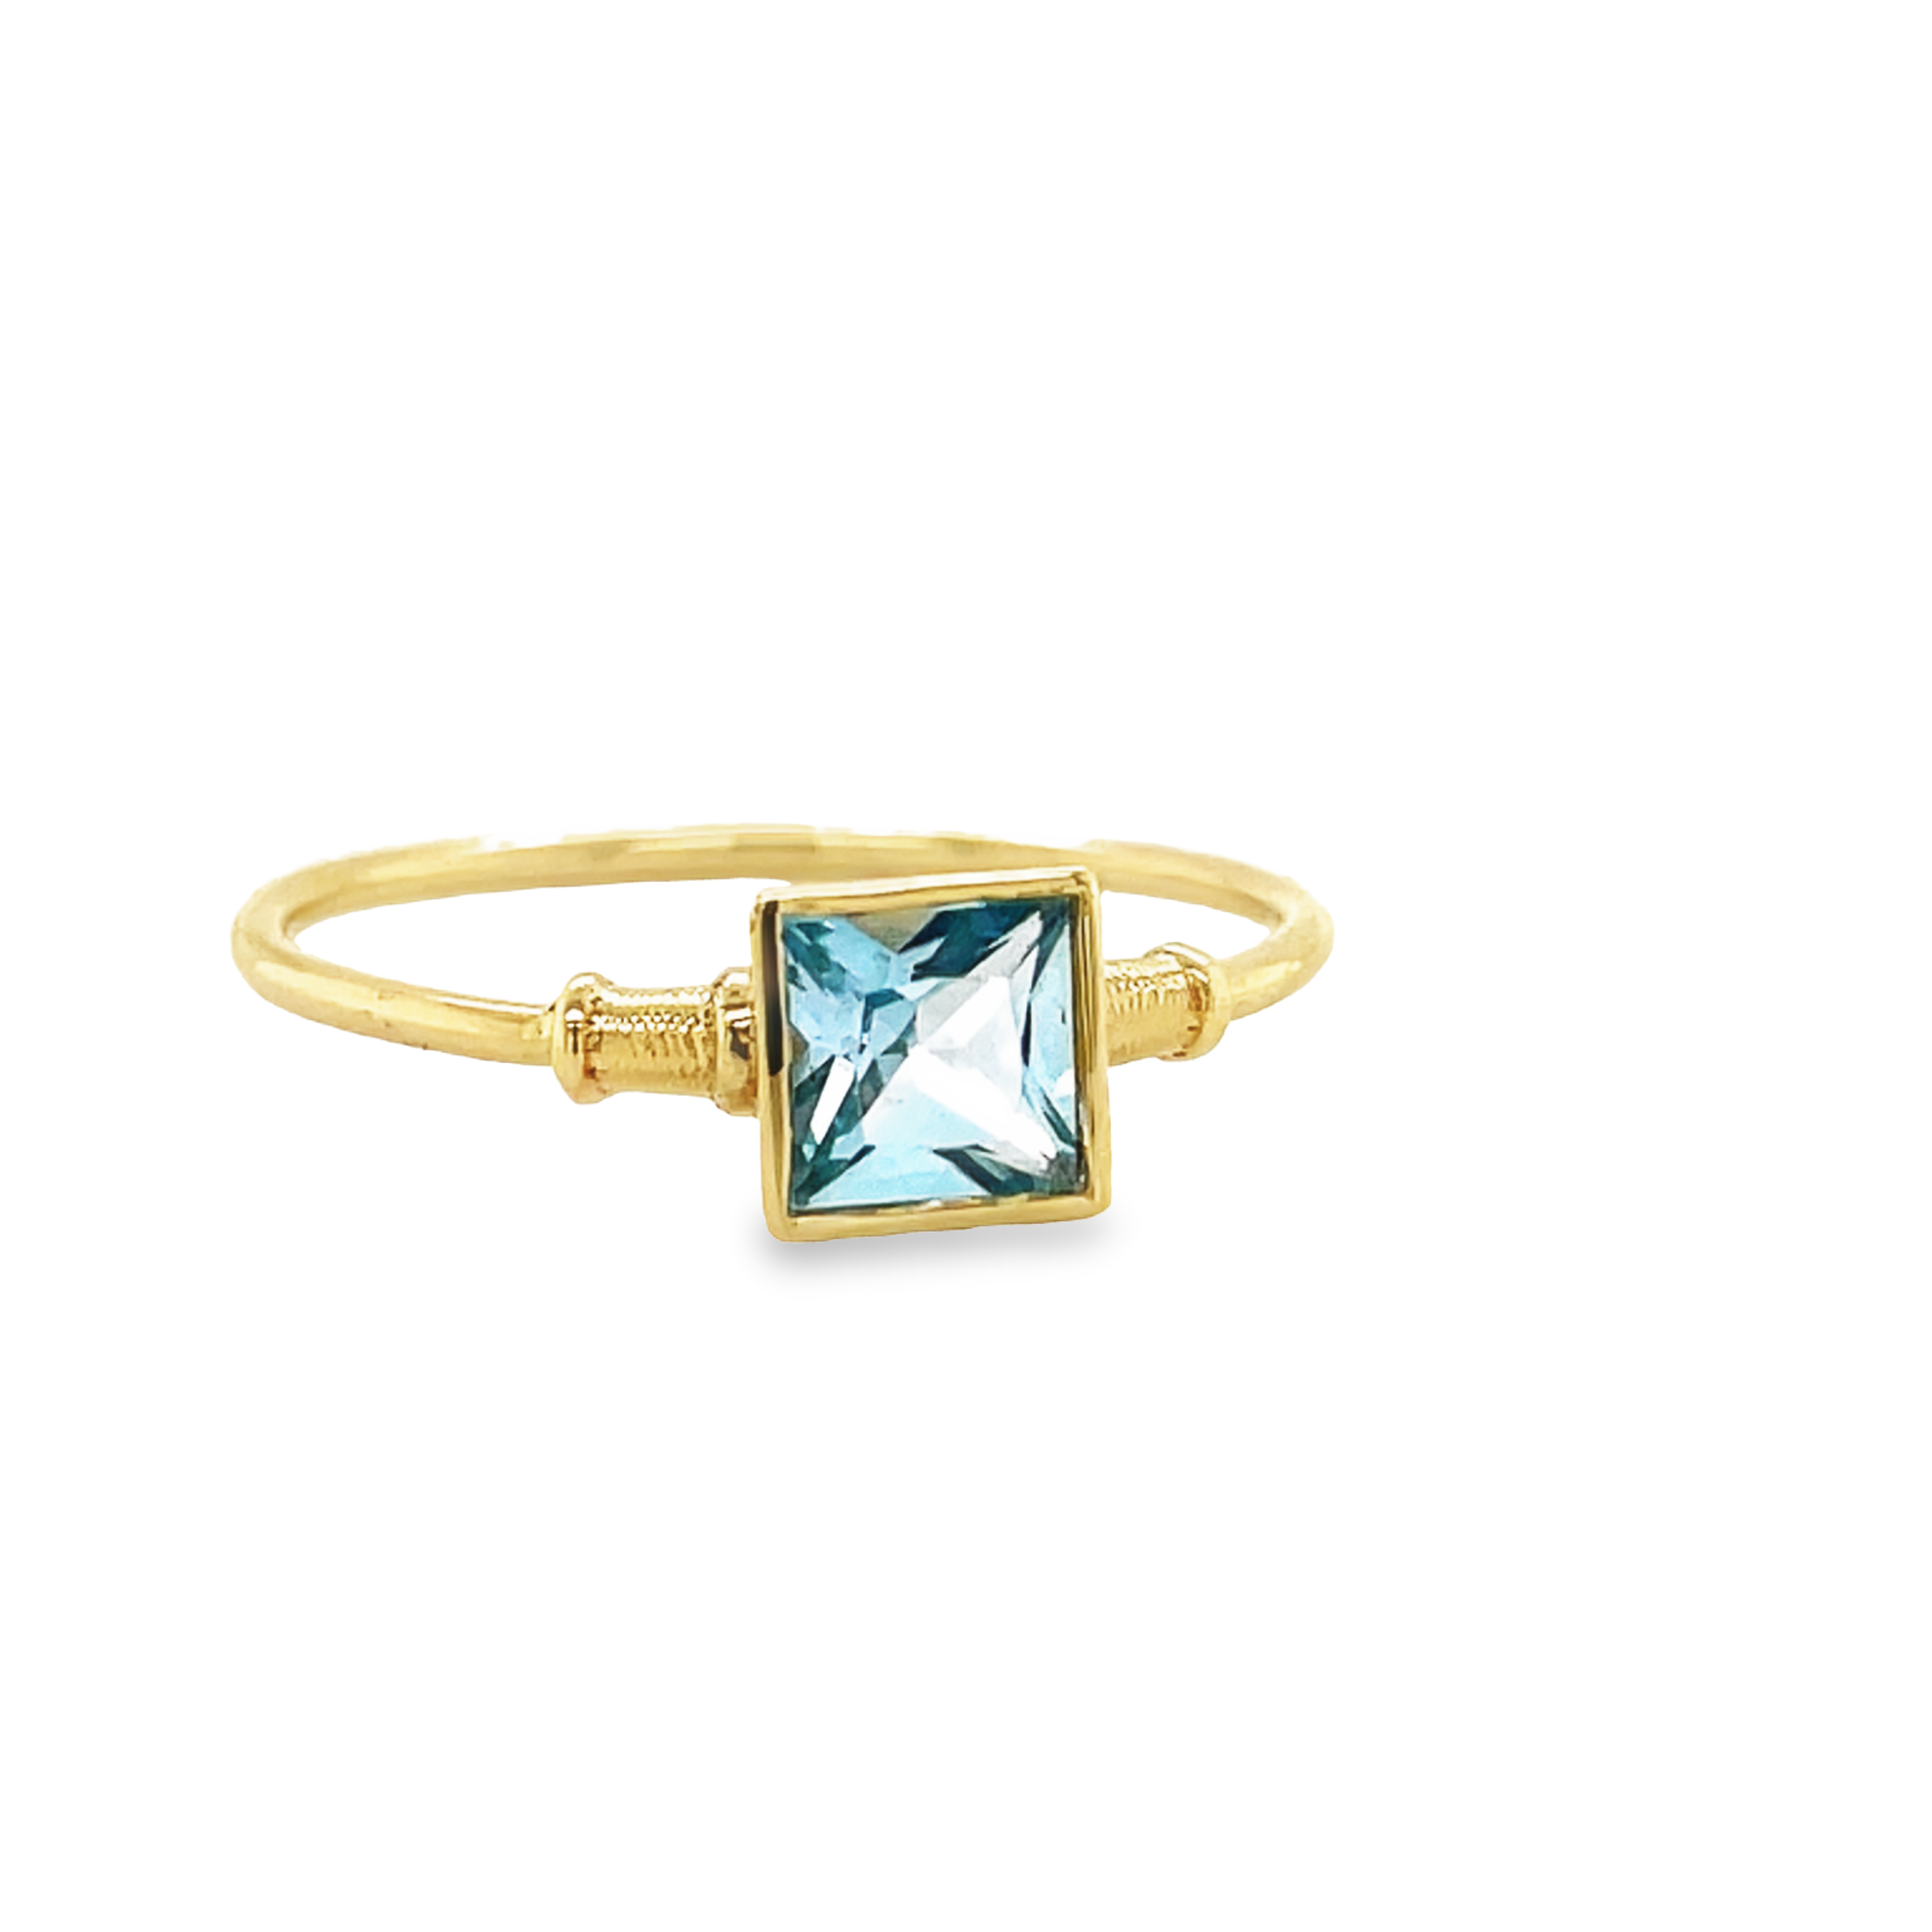 Crafted in elegant 14k yellow gold, this size 7.5 oval blue topaz ring sparkles with an impressive 7.00 mm gem. A distinctive rope style shank is the perfect finishing touch.